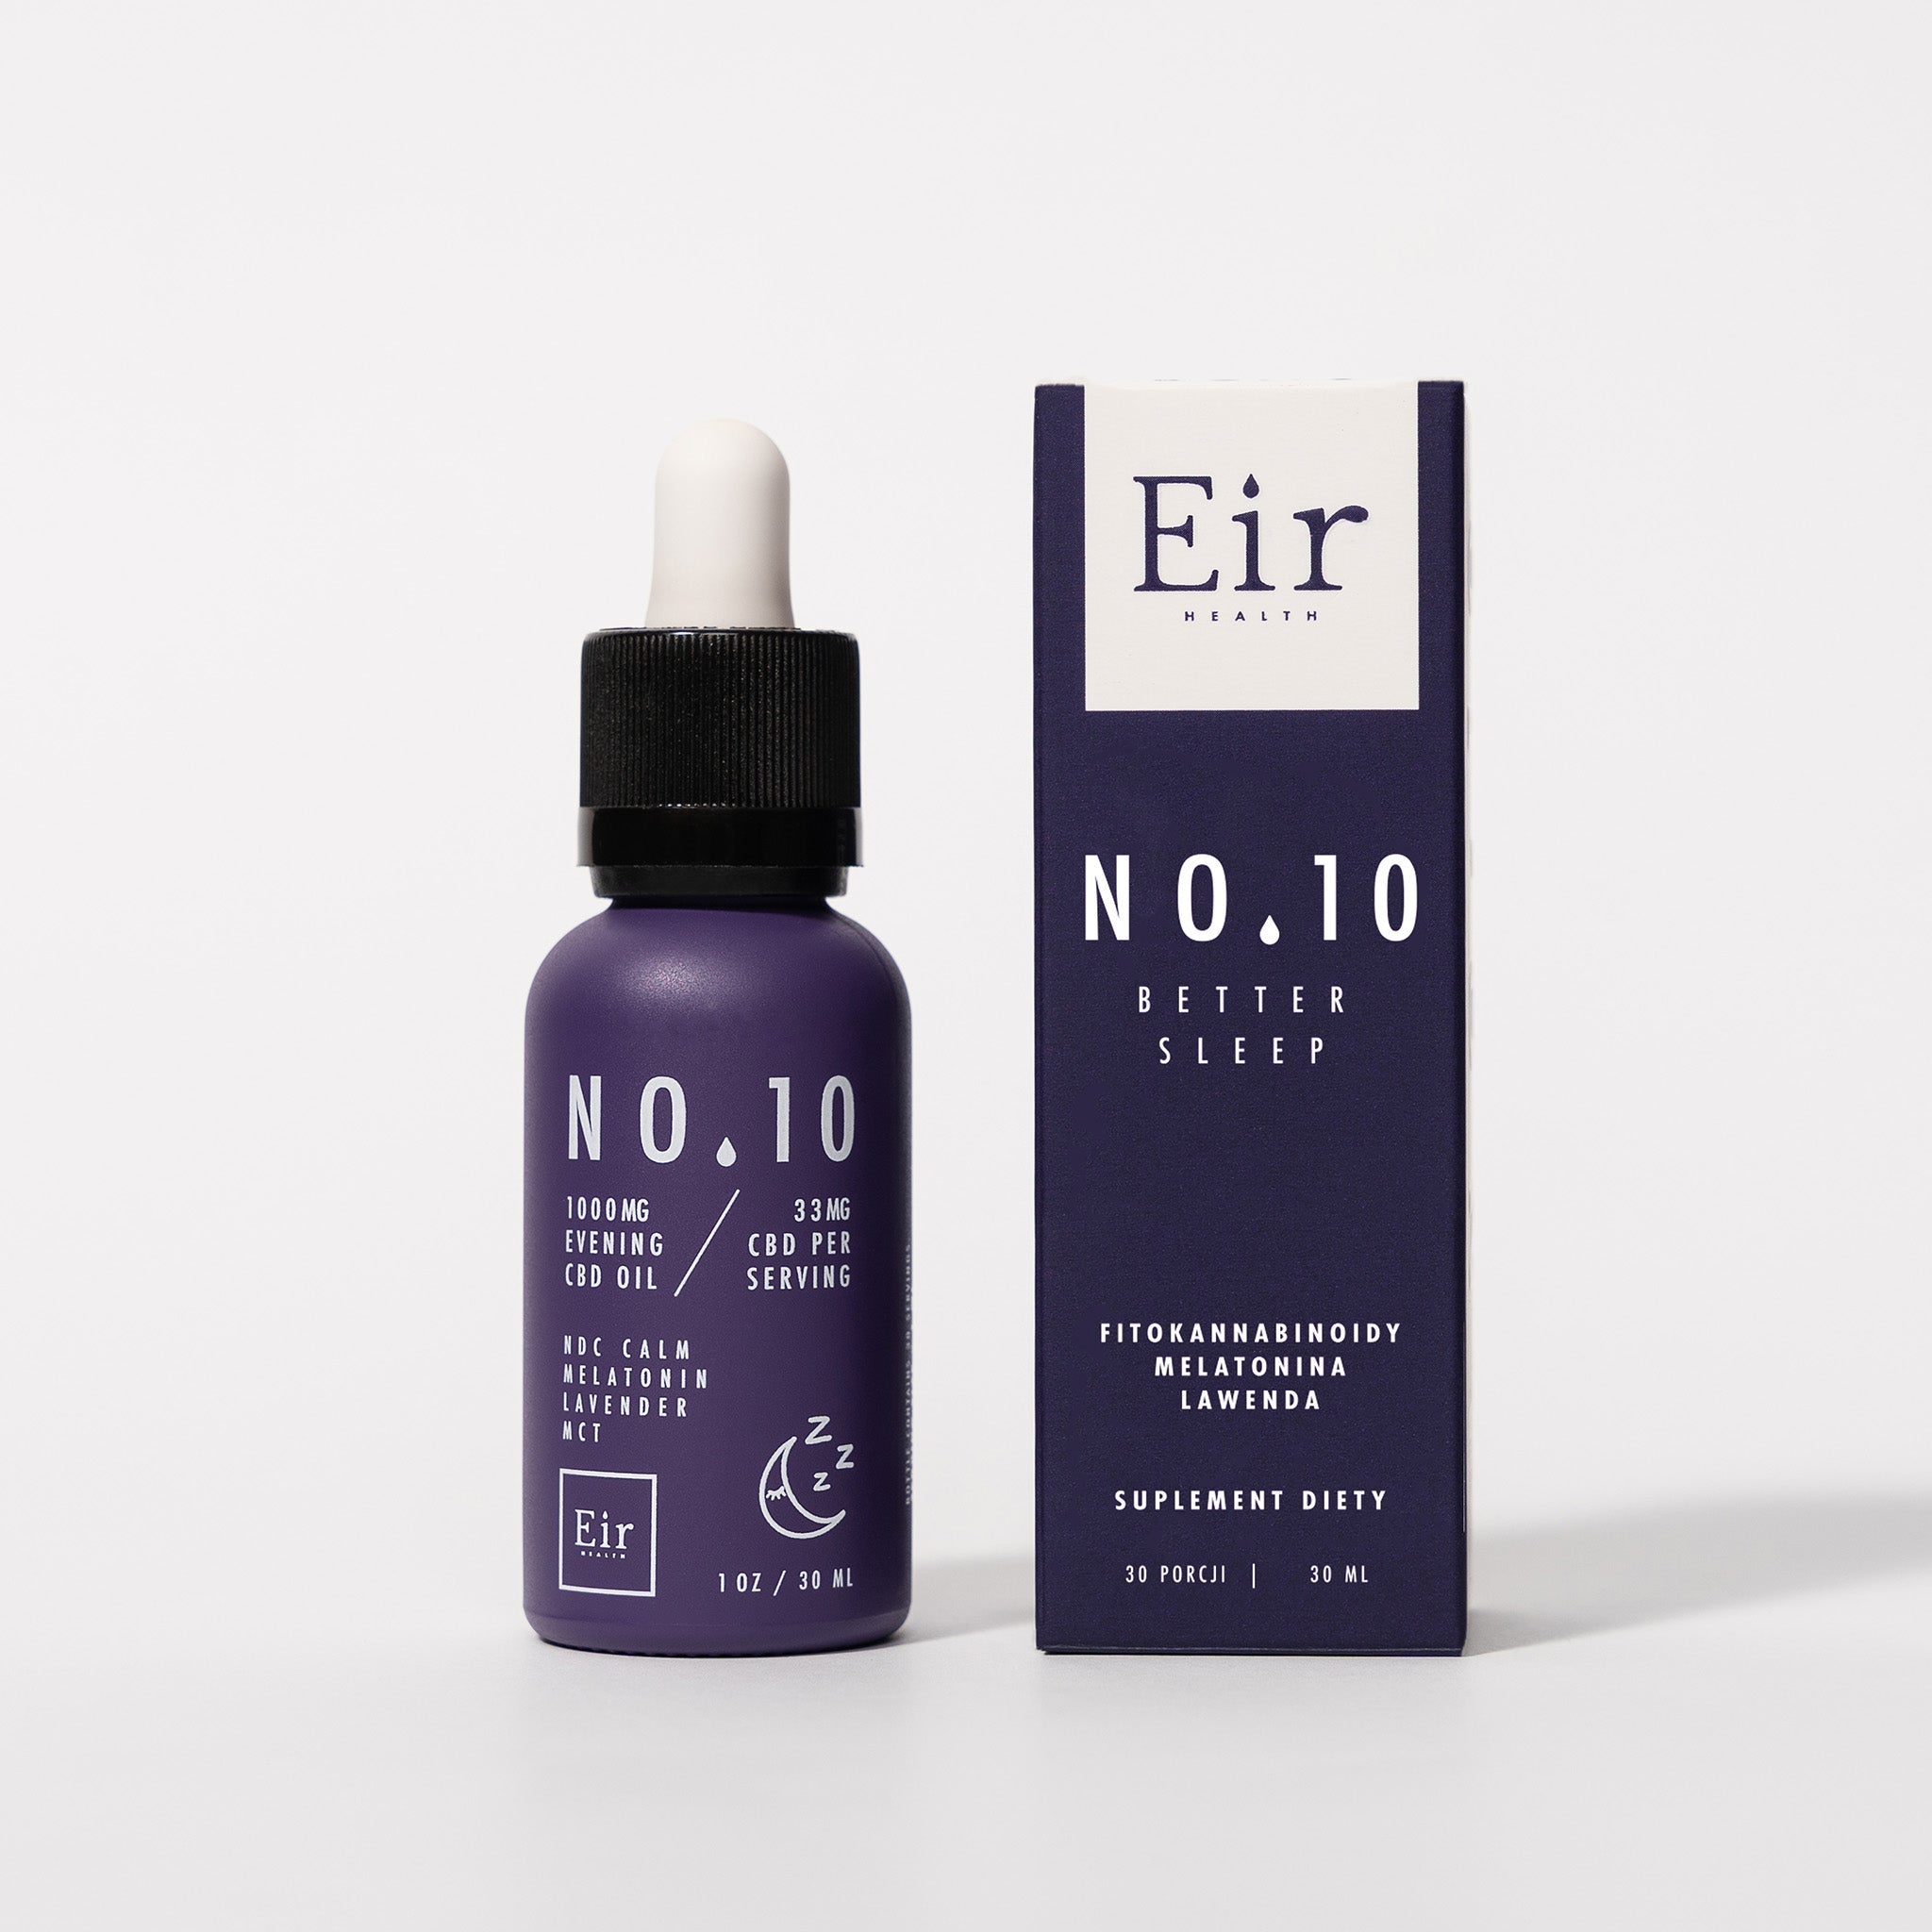 Purple bottle of Eir No. 10 CBD Oil with melatonin and lavender 'Better Sleep' next to its packaging, displaying 1000 mg CBD content, on a white background.